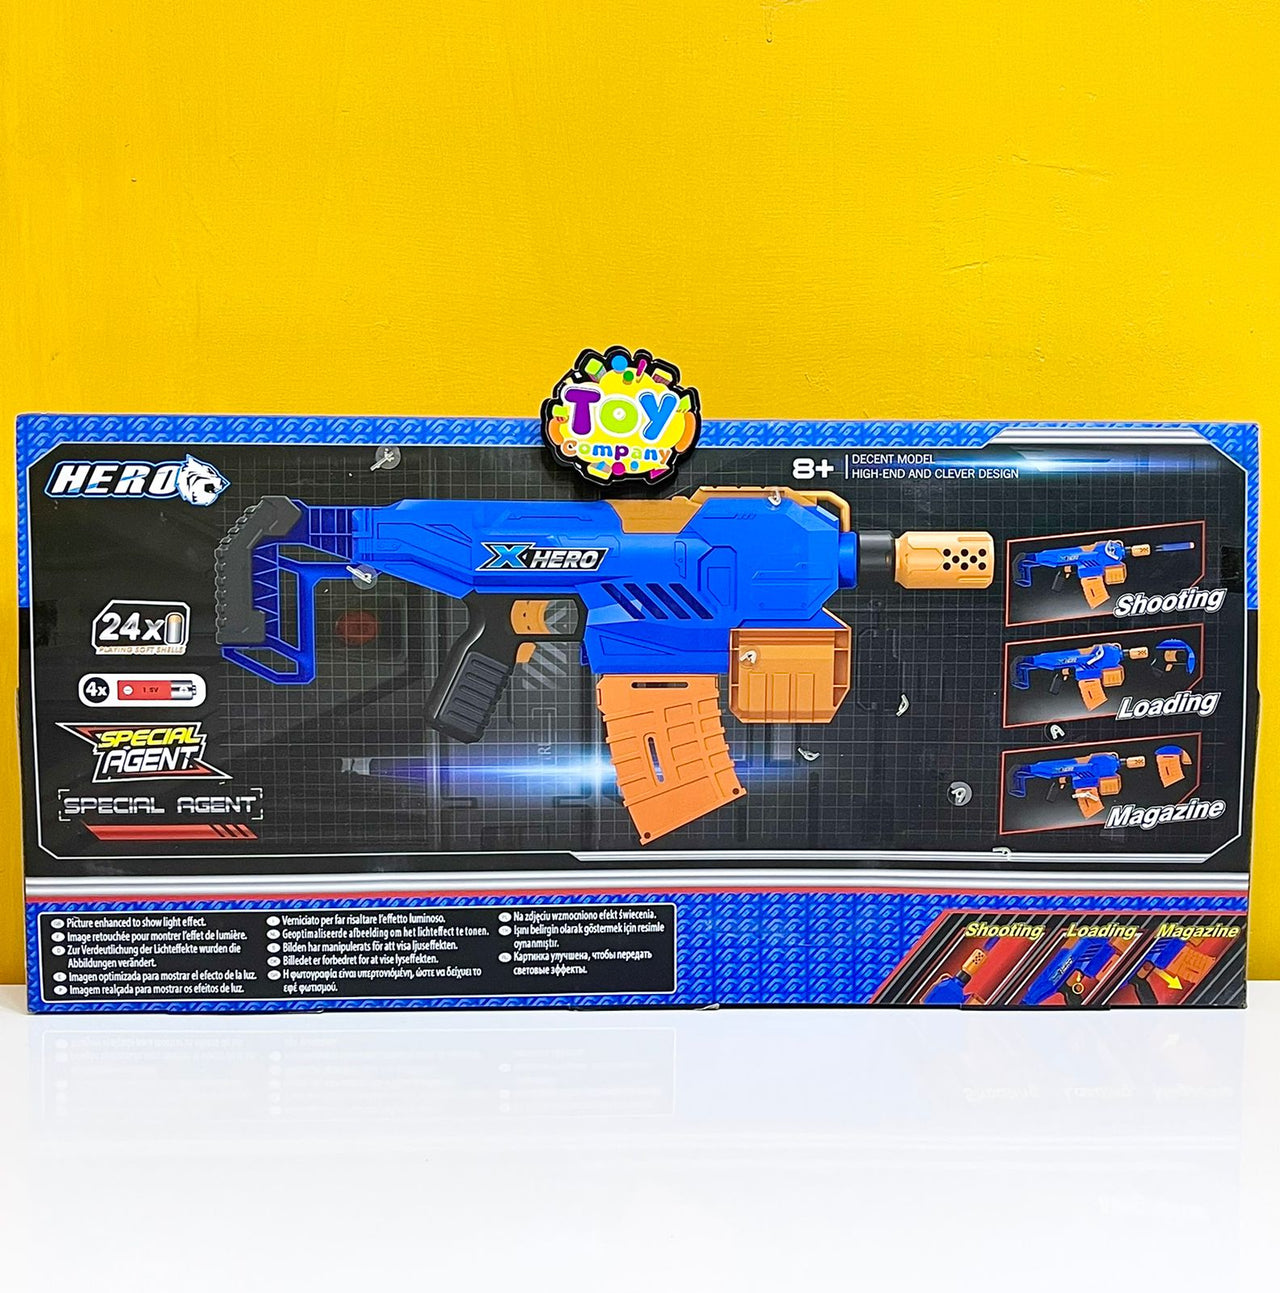 Super Fire Electric Gun Toy with Soft Darts & Target